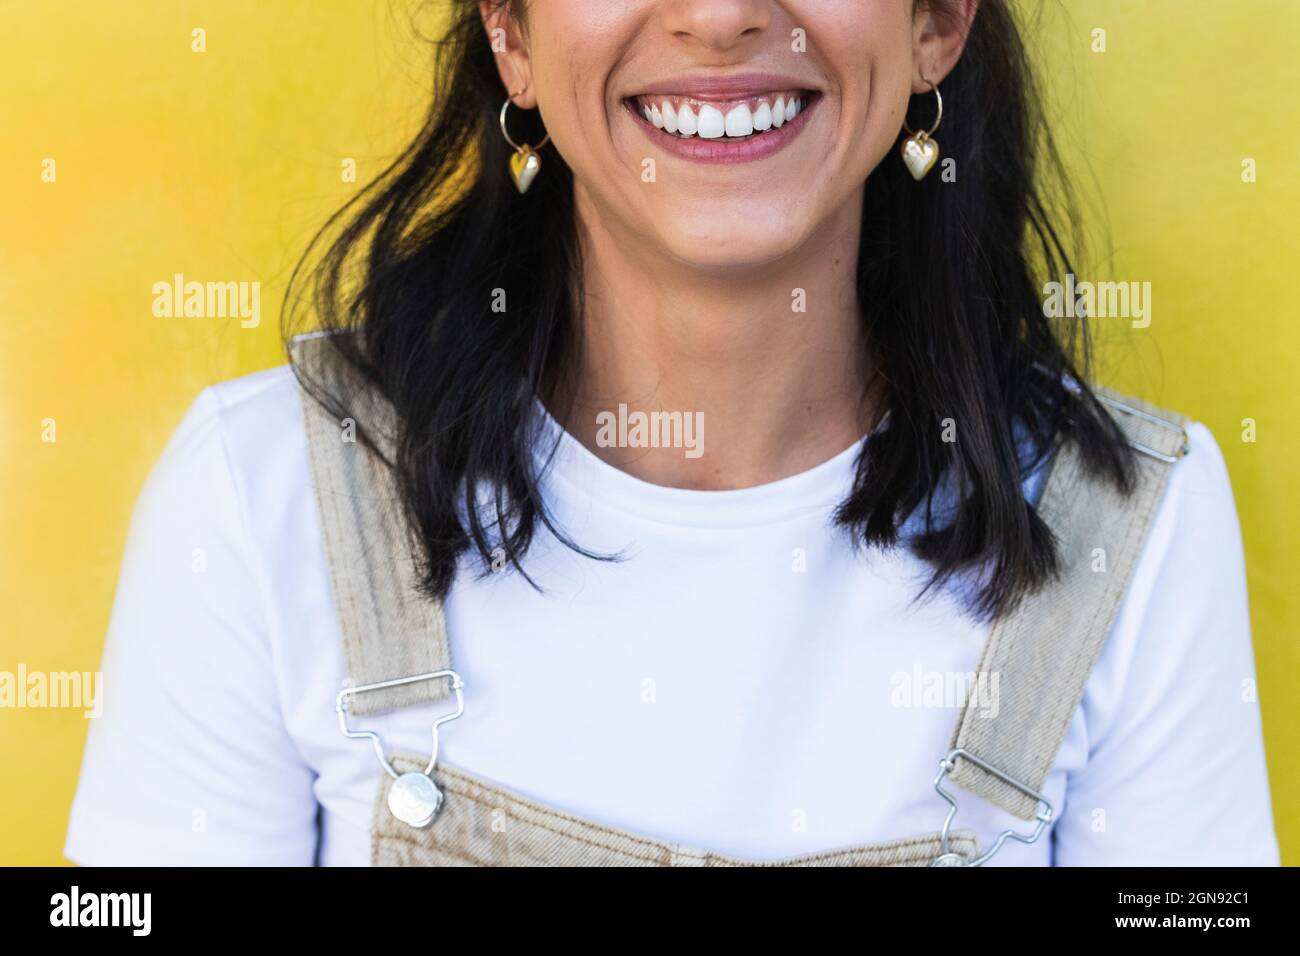 Young woman with toothy smile Stock Photo